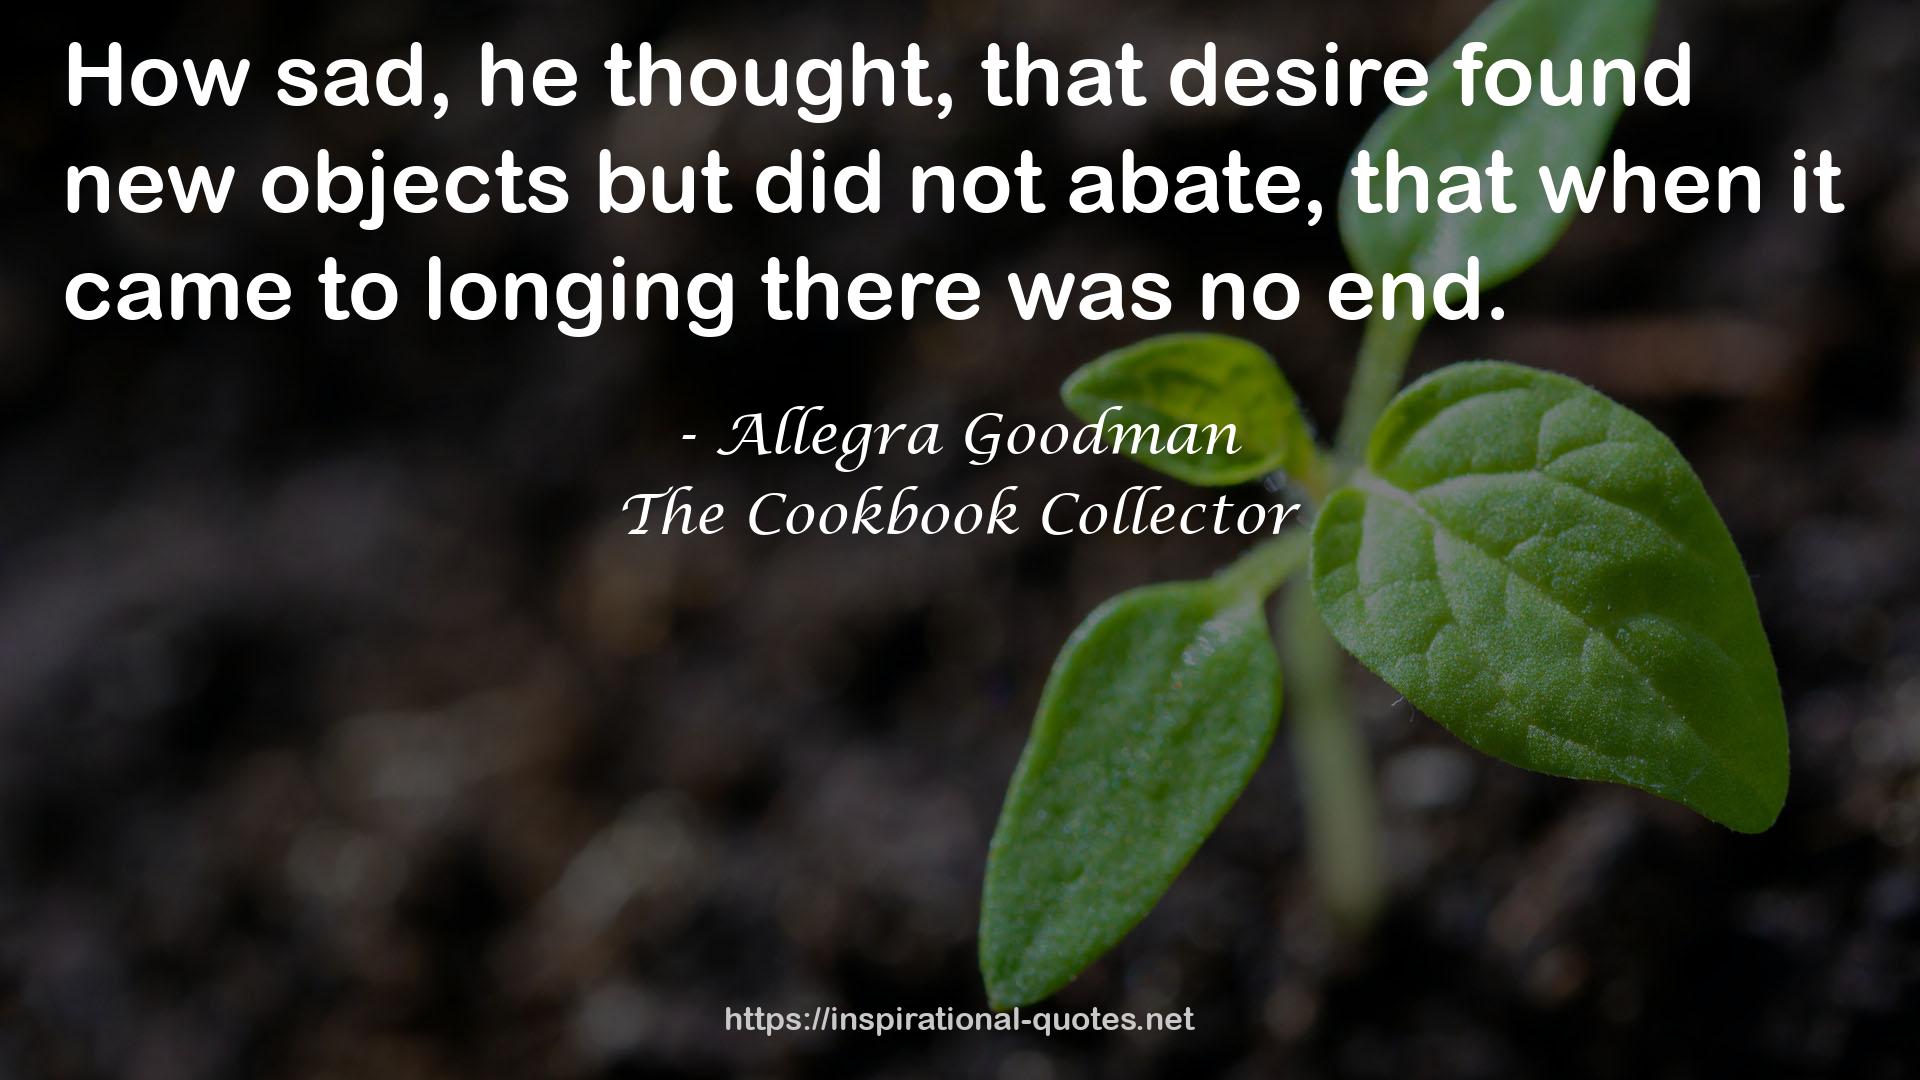 The Cookbook Collector QUOTES